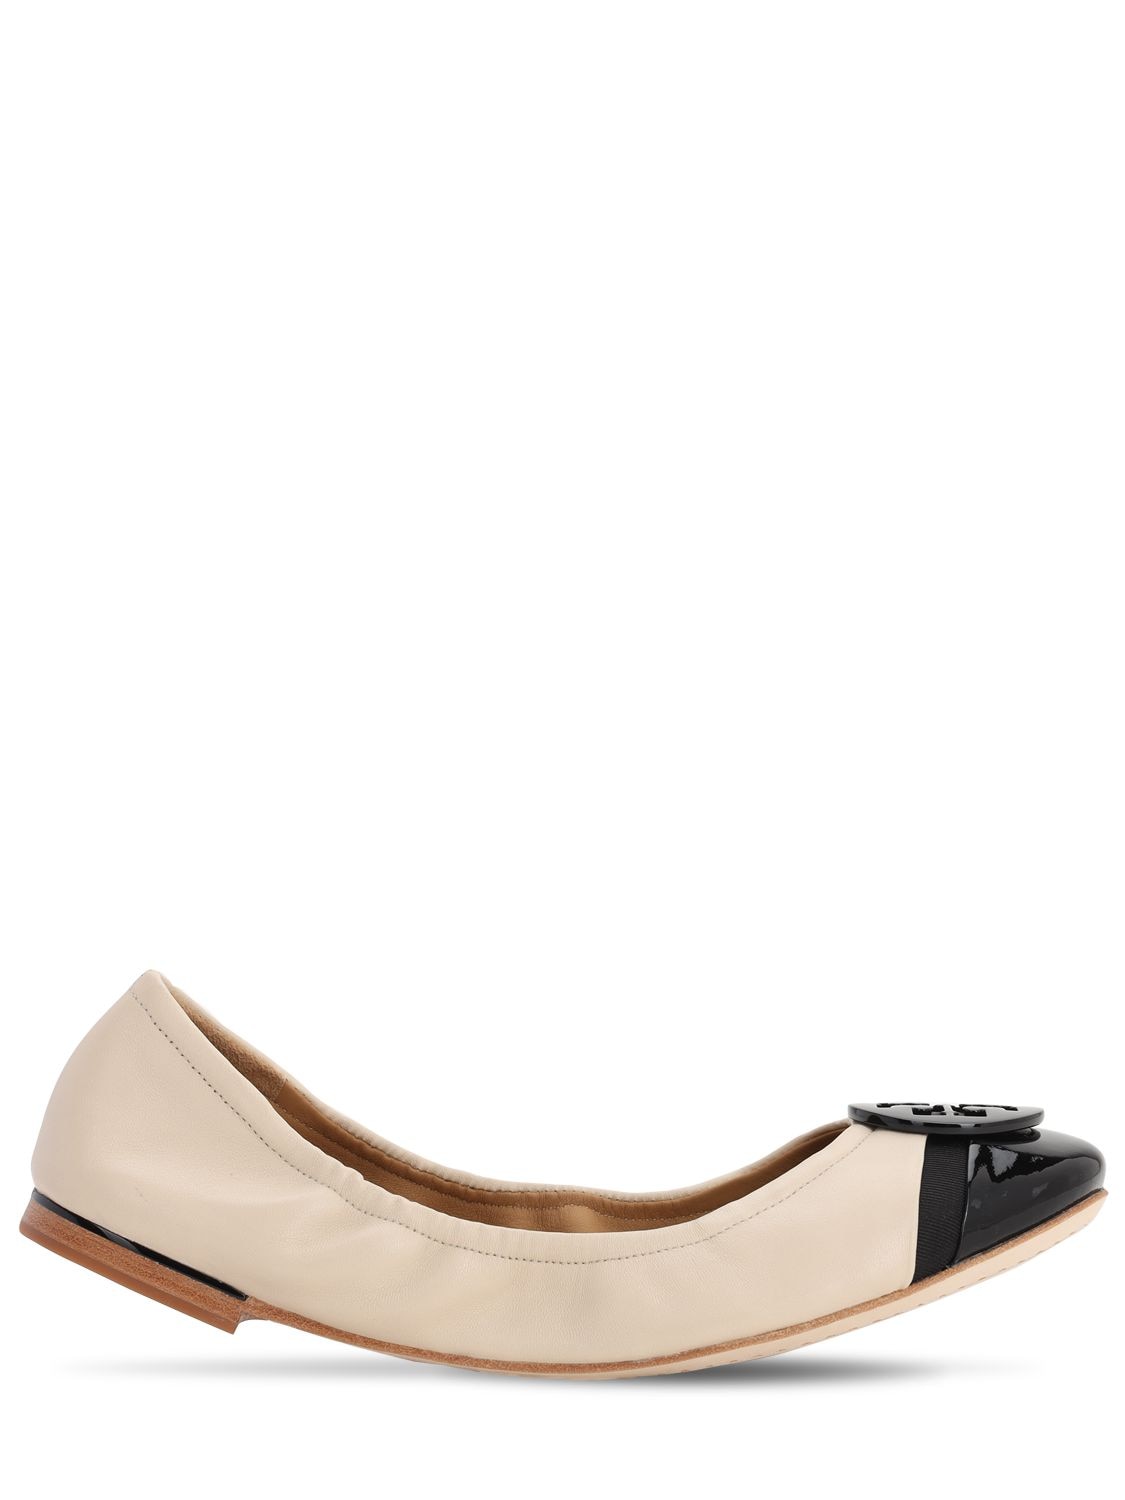 tory burch patent leather ballet flats